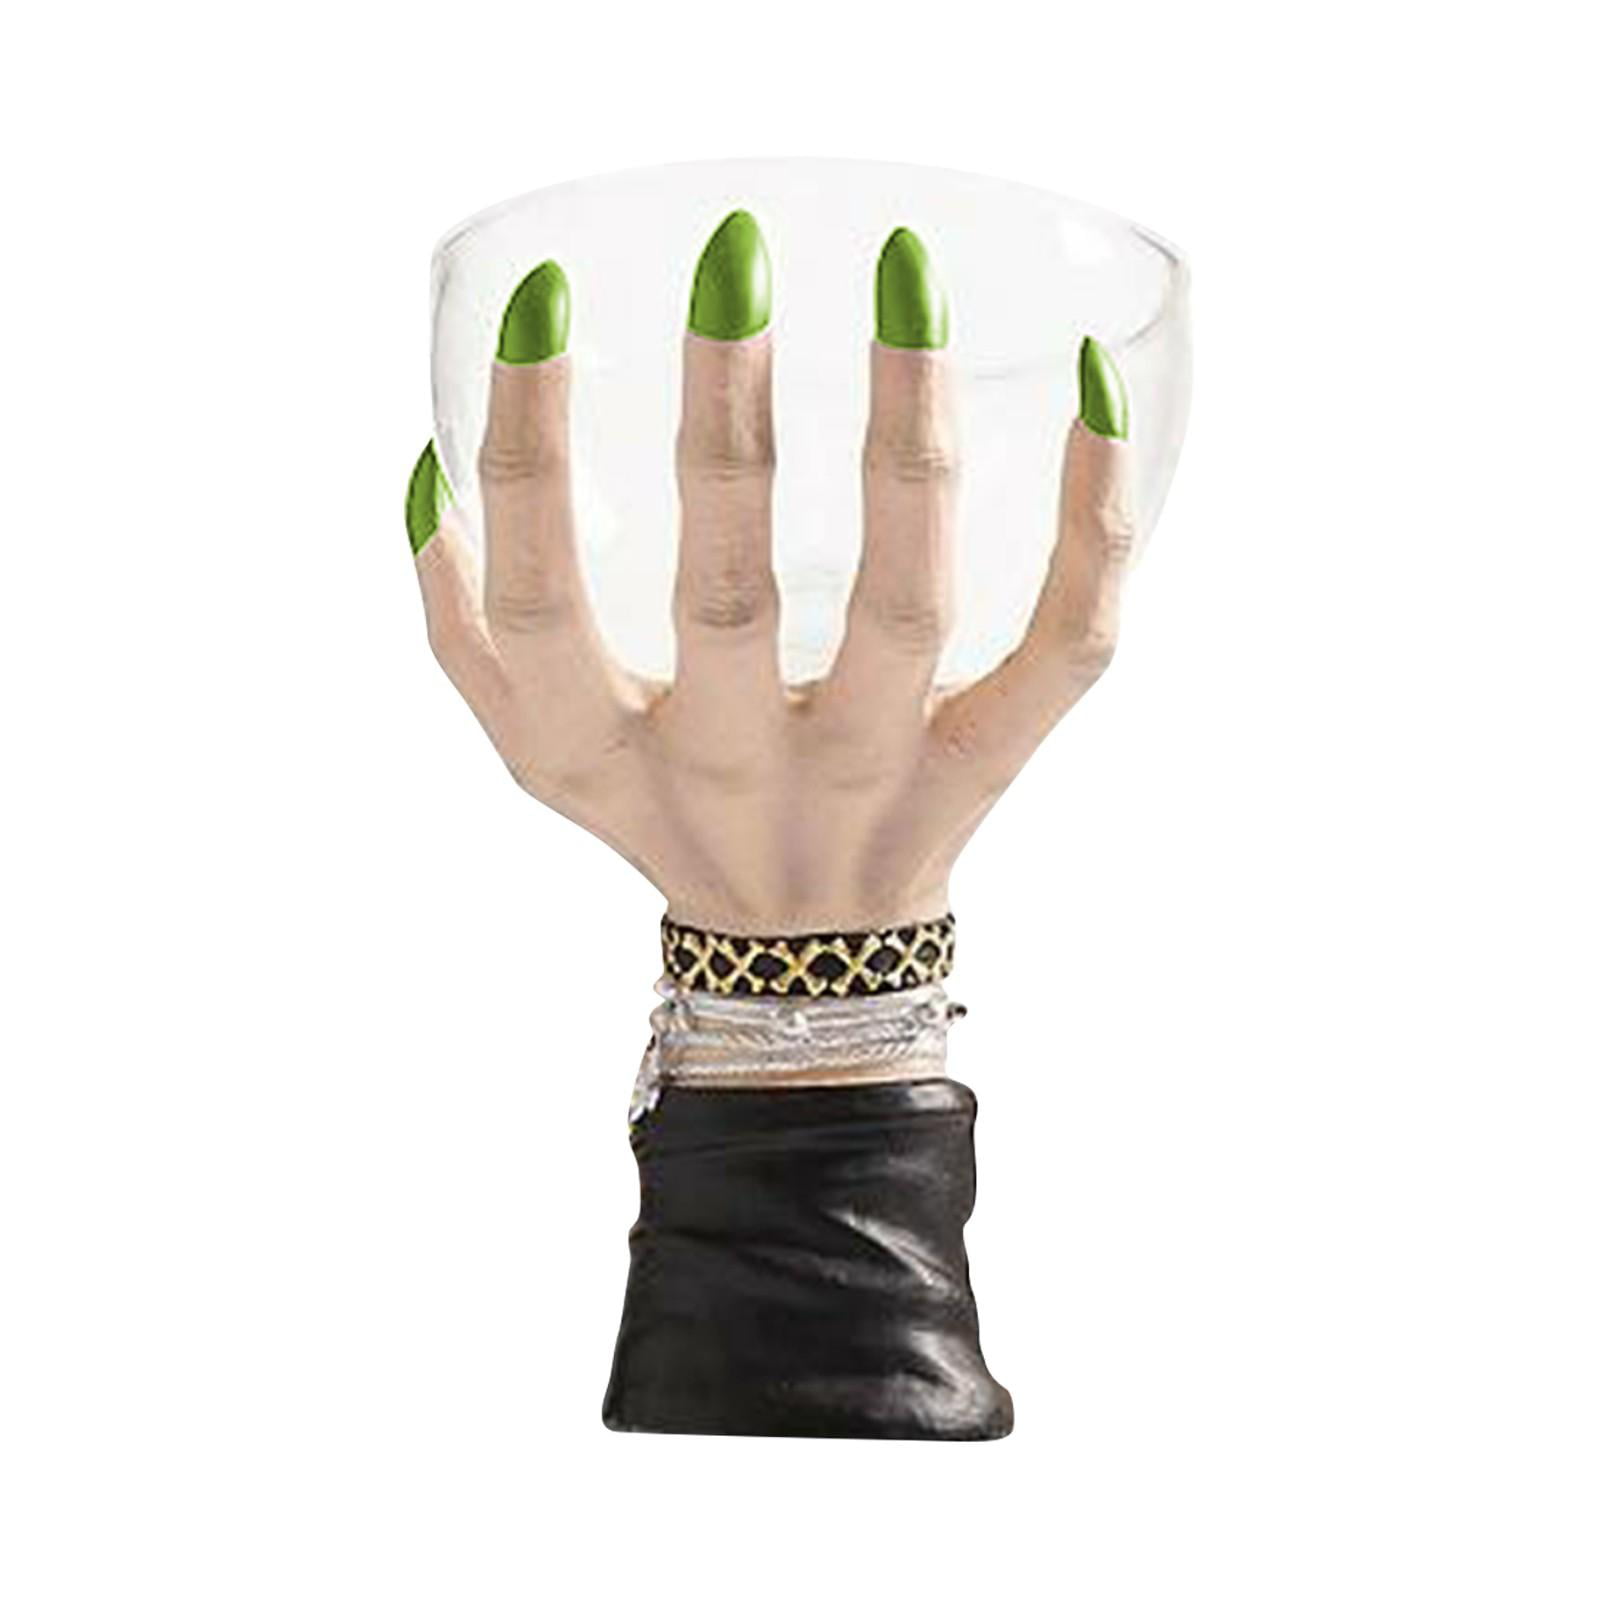 Witch Hands Snack Bowl Stand,Halloween Witch Hands Snack Bowl Stand Resin Desktop Ornament Halloween Home Party Decoration,Suitable to Festival Wedding Party Xmas Decor Black 